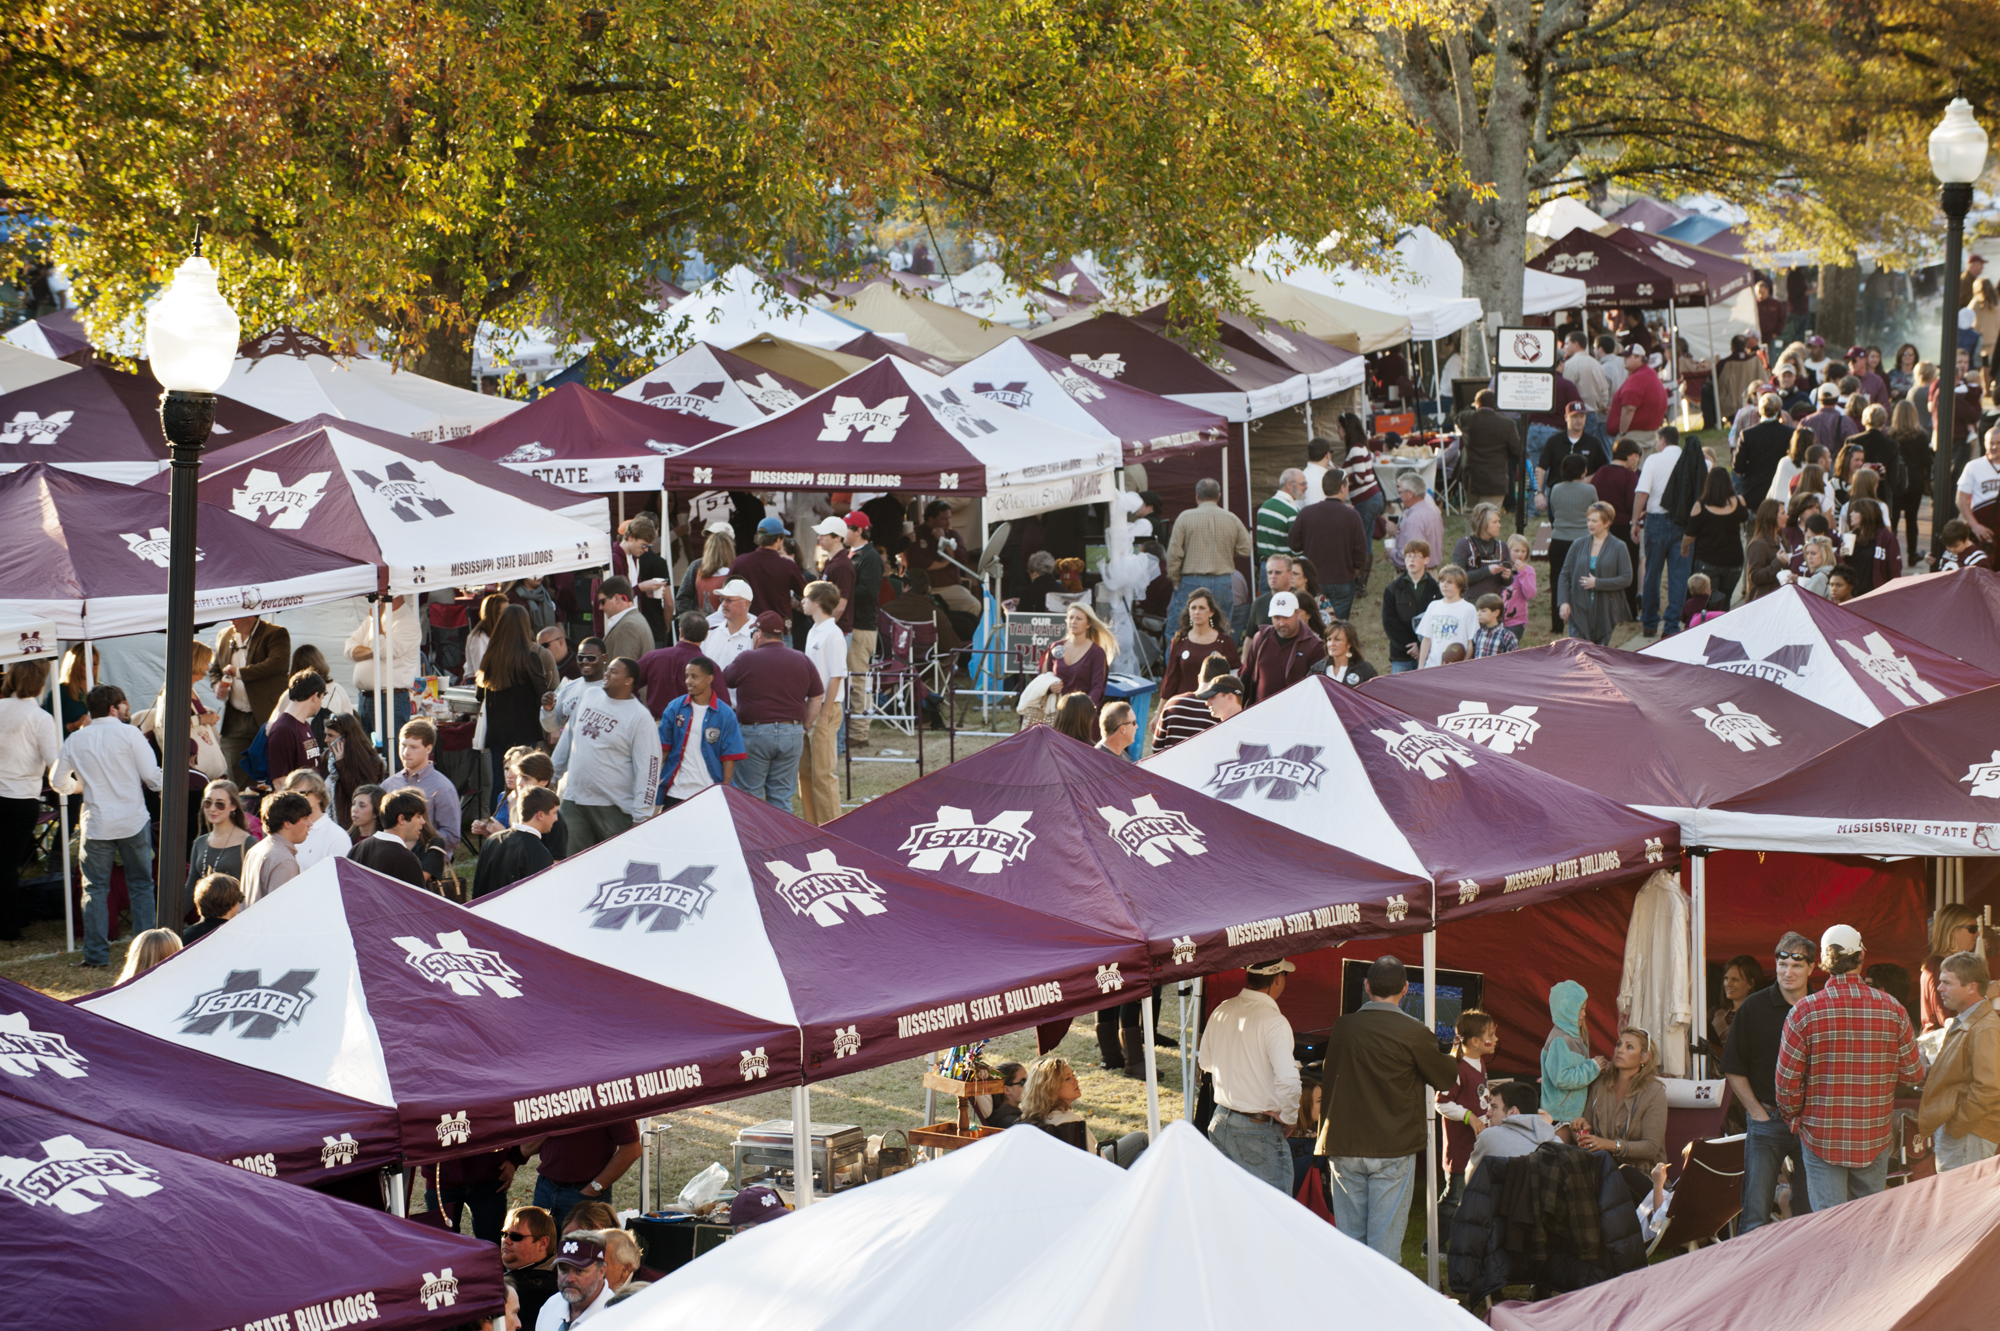 Game day at Mississippi State just got even better with the addition of a new fan website, www.fanguide.msstate.edu.